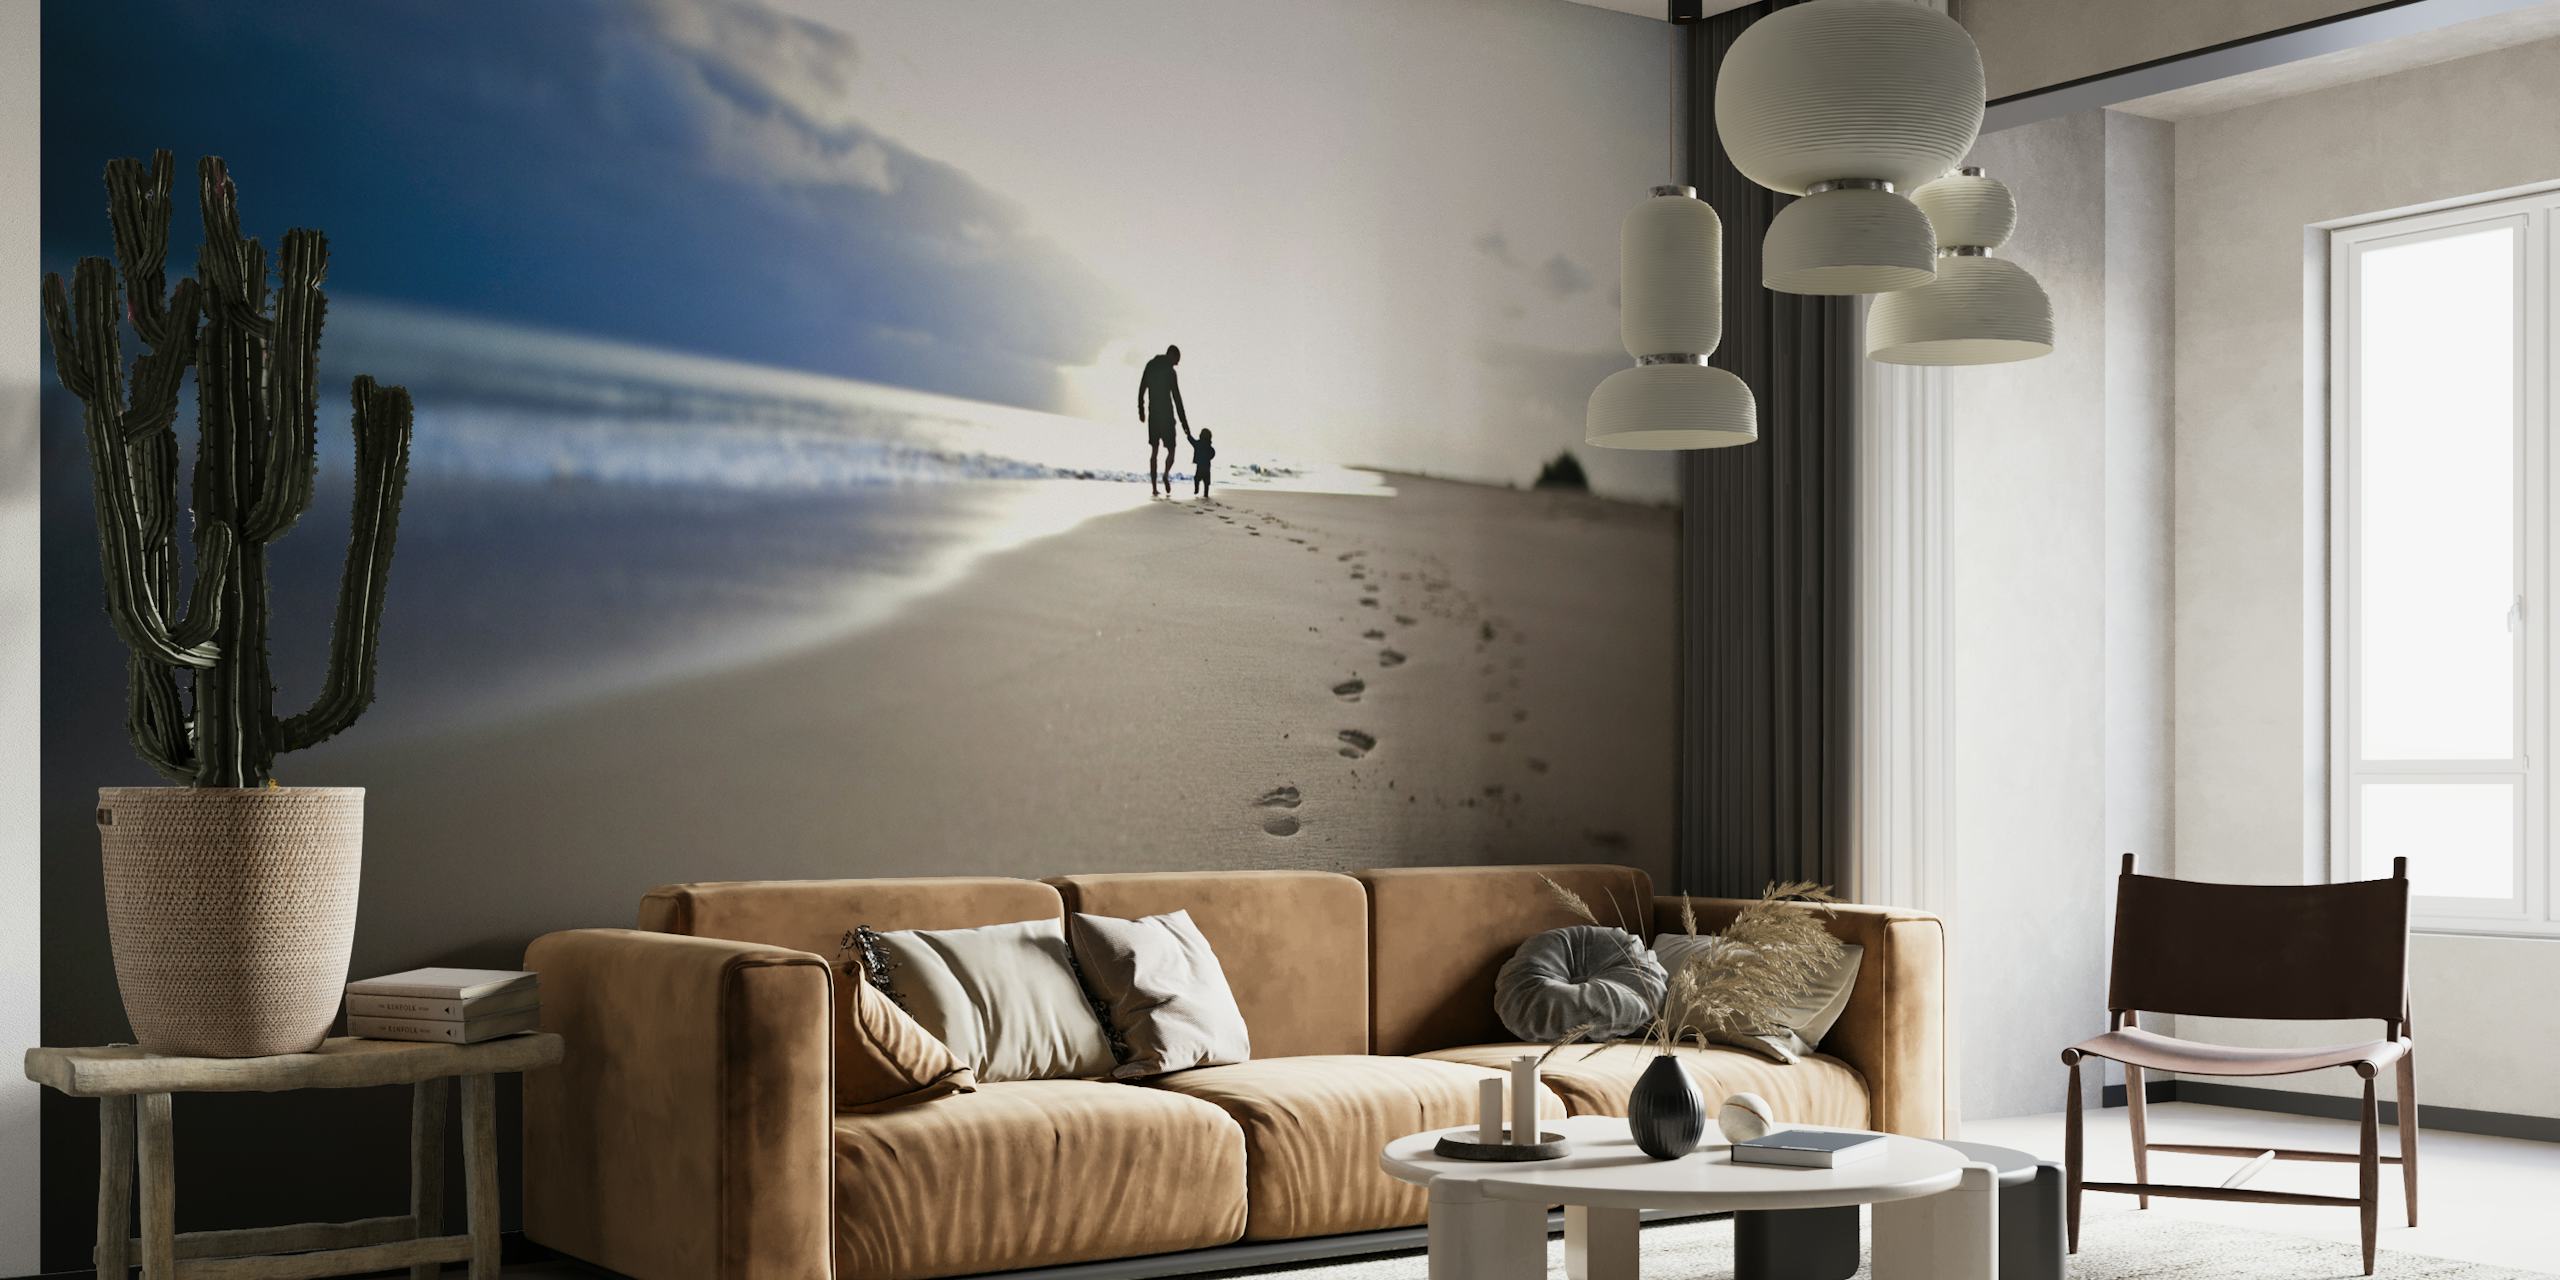 A silhouette of a father and son walking on the beach captured in the wall mural 'Father and Son'.